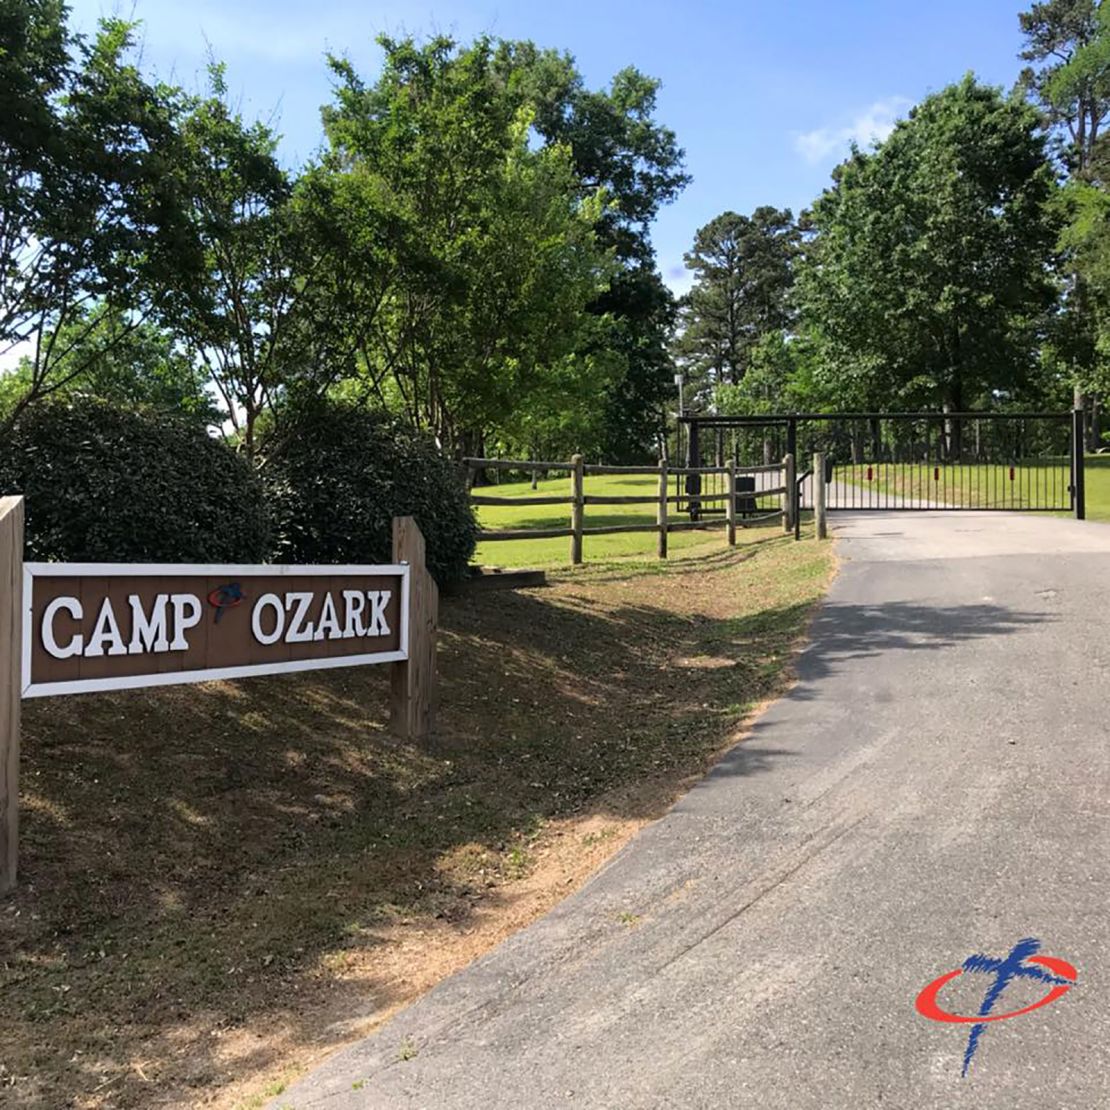 Camp Ozark in Mount Ida, Arkansas, is one of the summer camps that have had to temporarily close after a Covid-19 outbreak among its campers and staff.